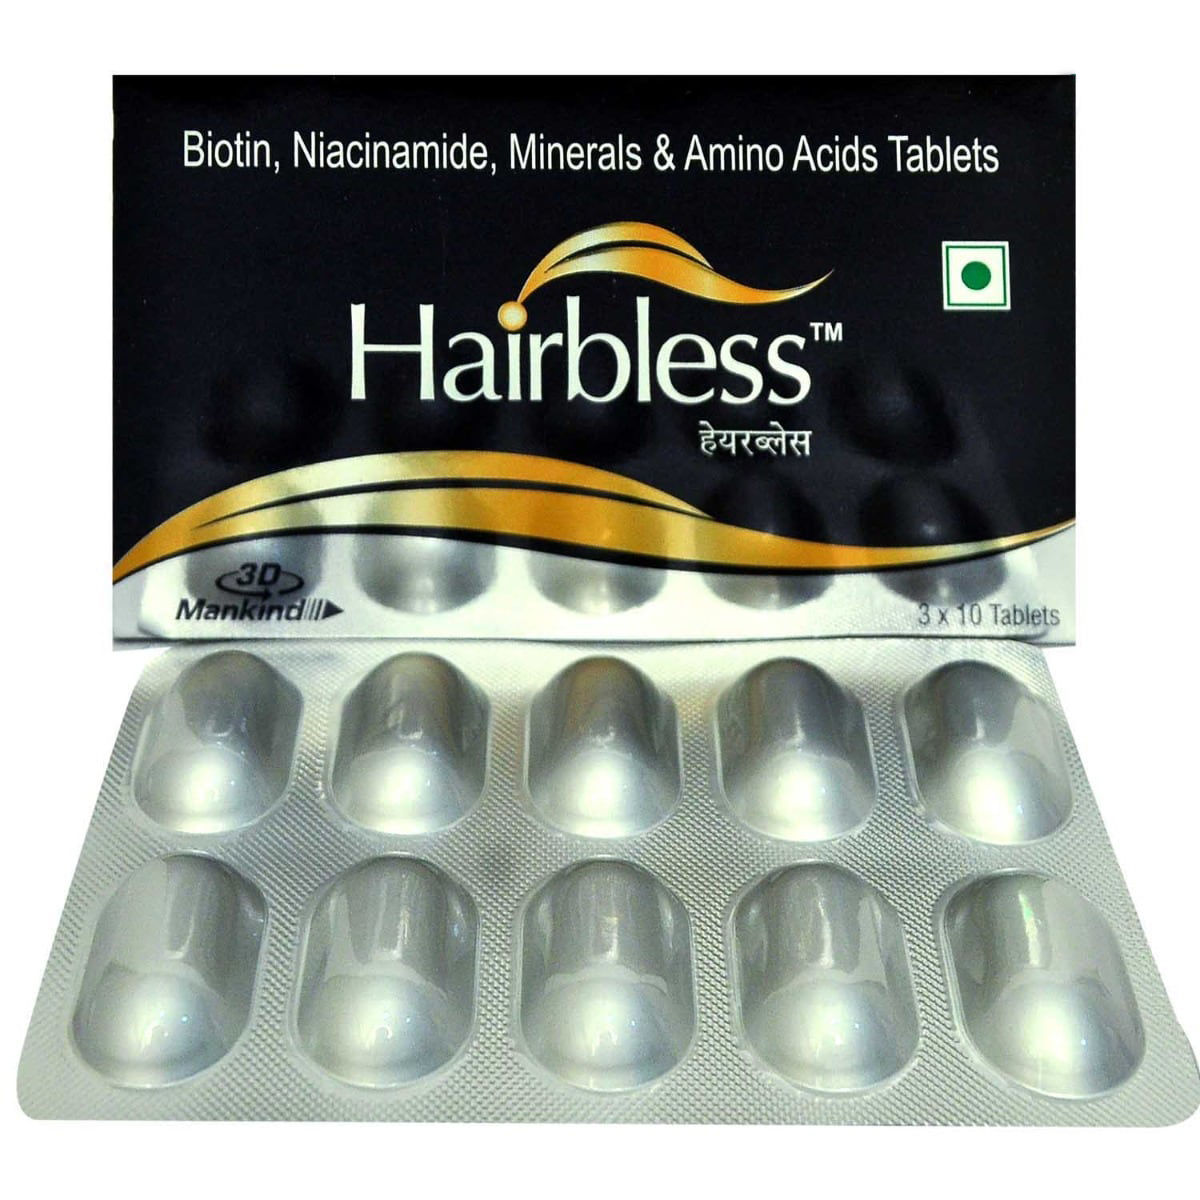 Best Homeopathic Medicines for ALOPECIA  BALDNESS Treatment